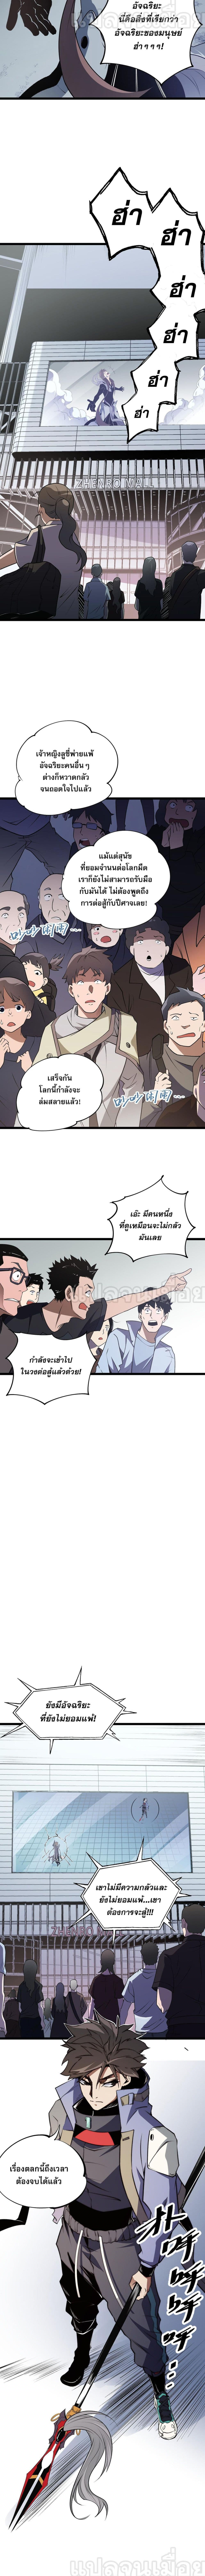 Job Changing for the Entire Population: The Jobless Me Will Terminate the Gods ฉันคือผู้เล่นไร้อาชีพที่สังหารเหล่าเทพ 74-74